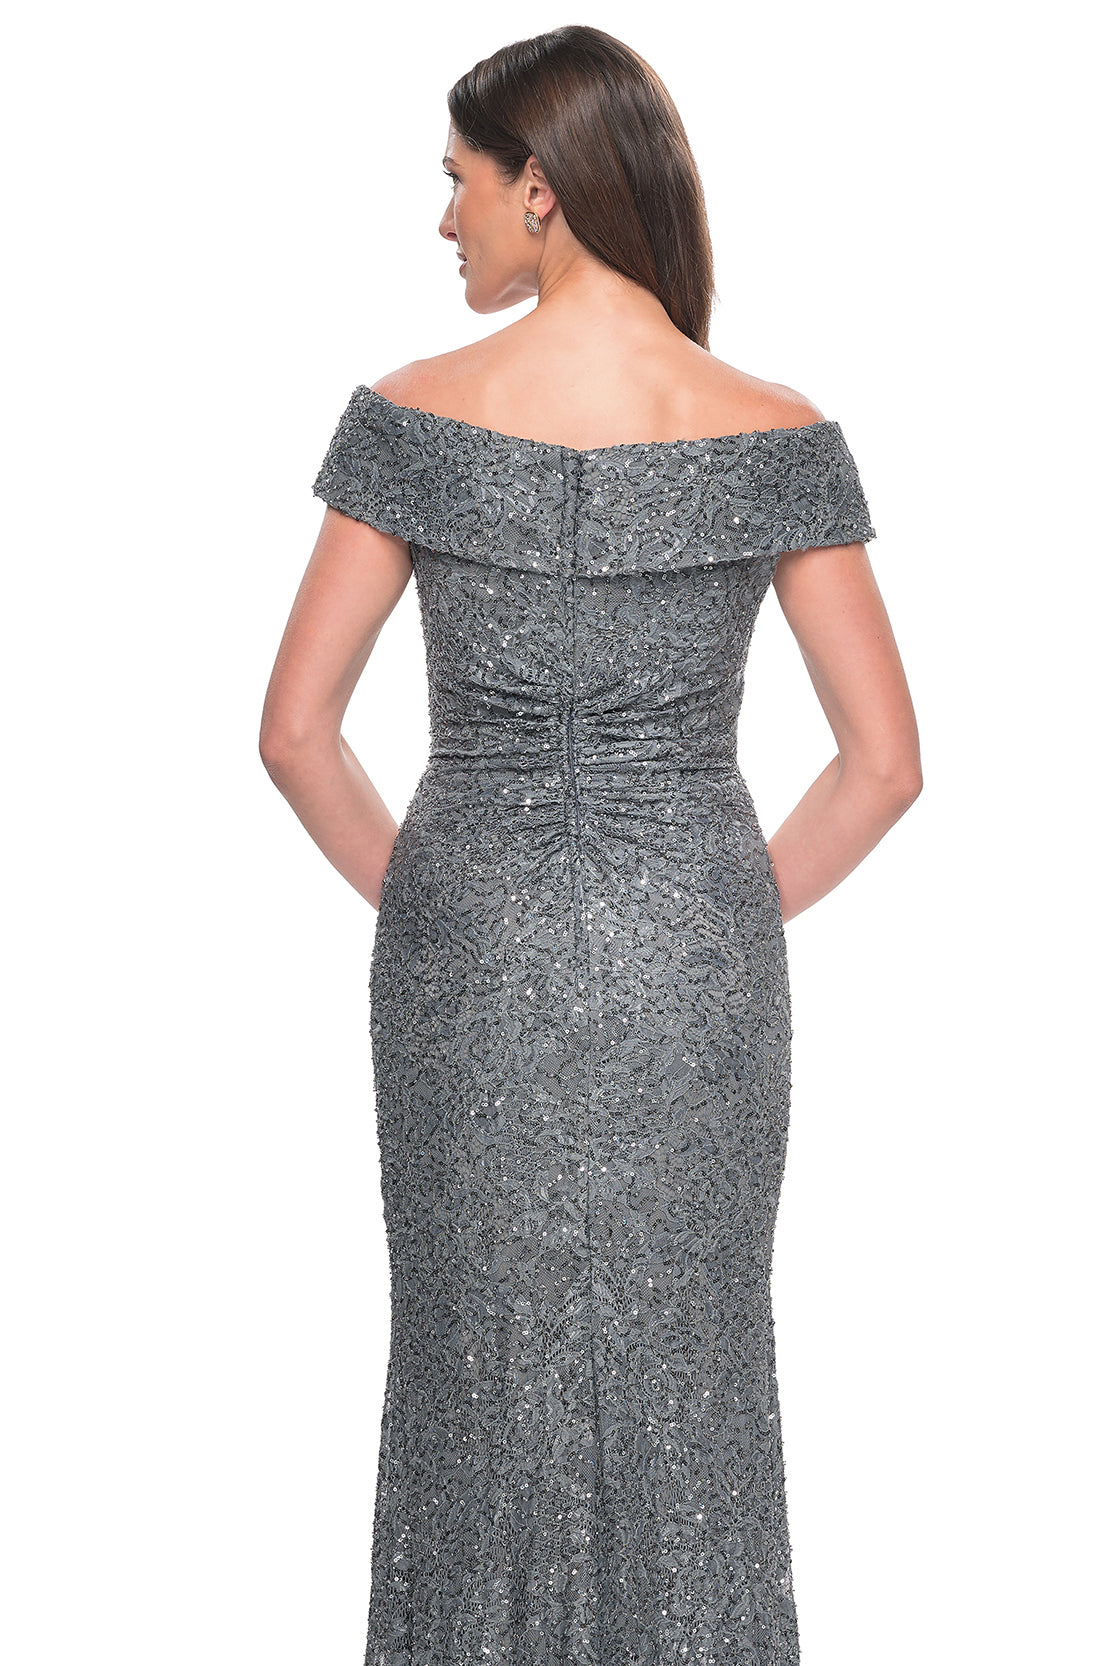 La Femme 31679 Enchanting Beaded Lace Off-the-Shoulder Evening Gown - A breathtaking ensemble featuring intricate beaded lace, off-the-shoulder design, ruching details, and a flattering V neckline for a look of timeless elegance.  The model is wearing the dress in the color gunmetal.  Back View.